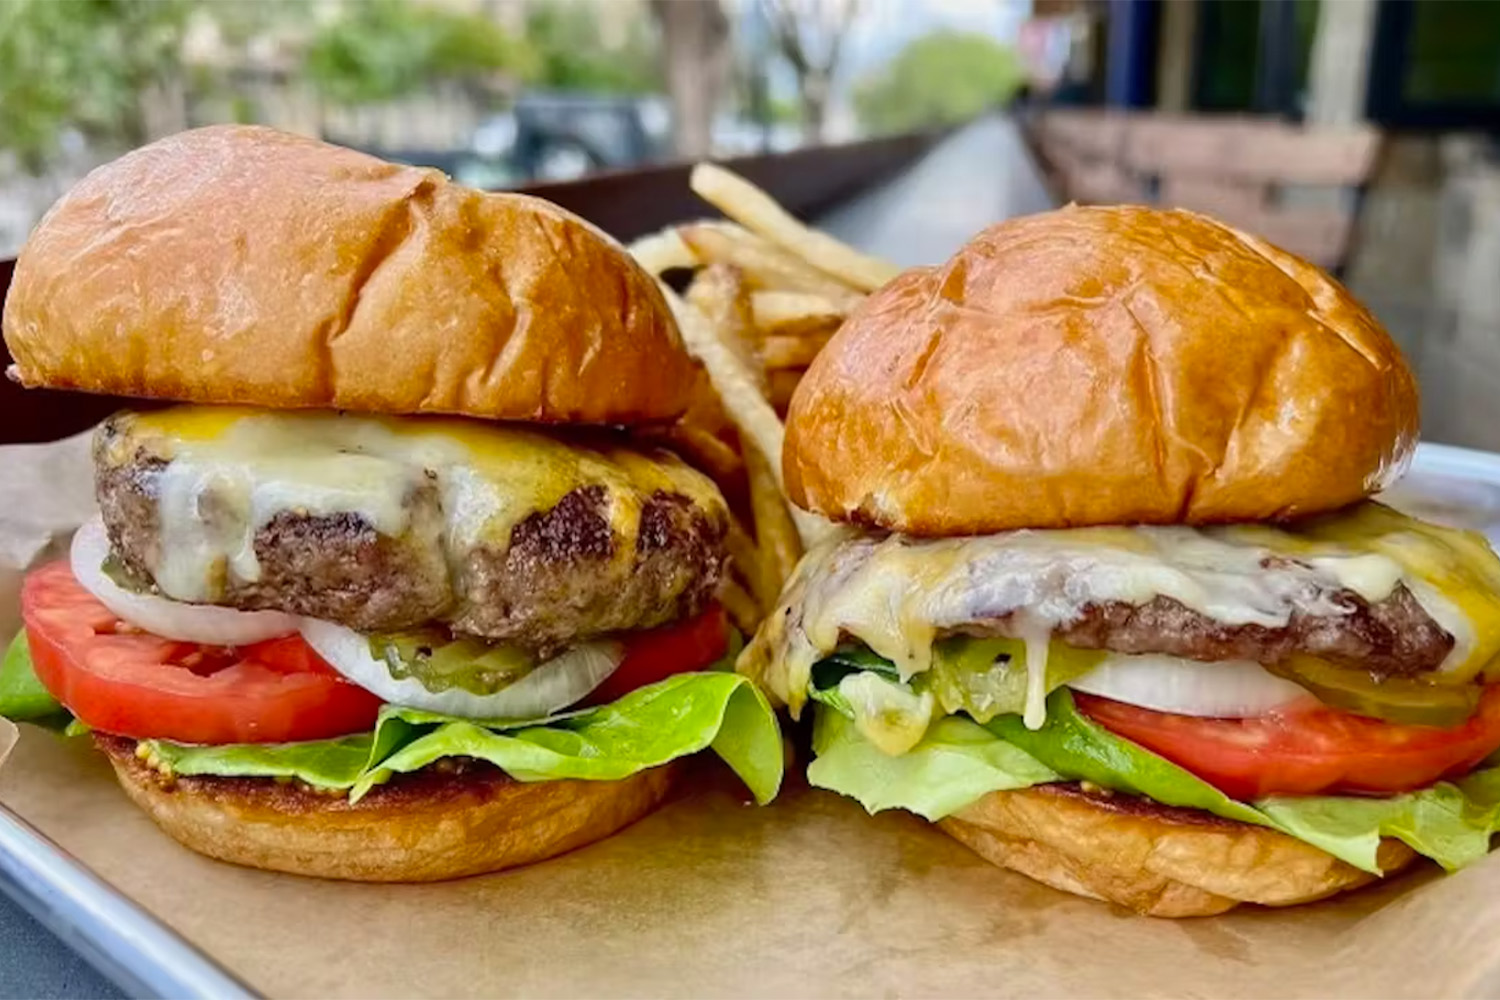 two burgers side-by-side